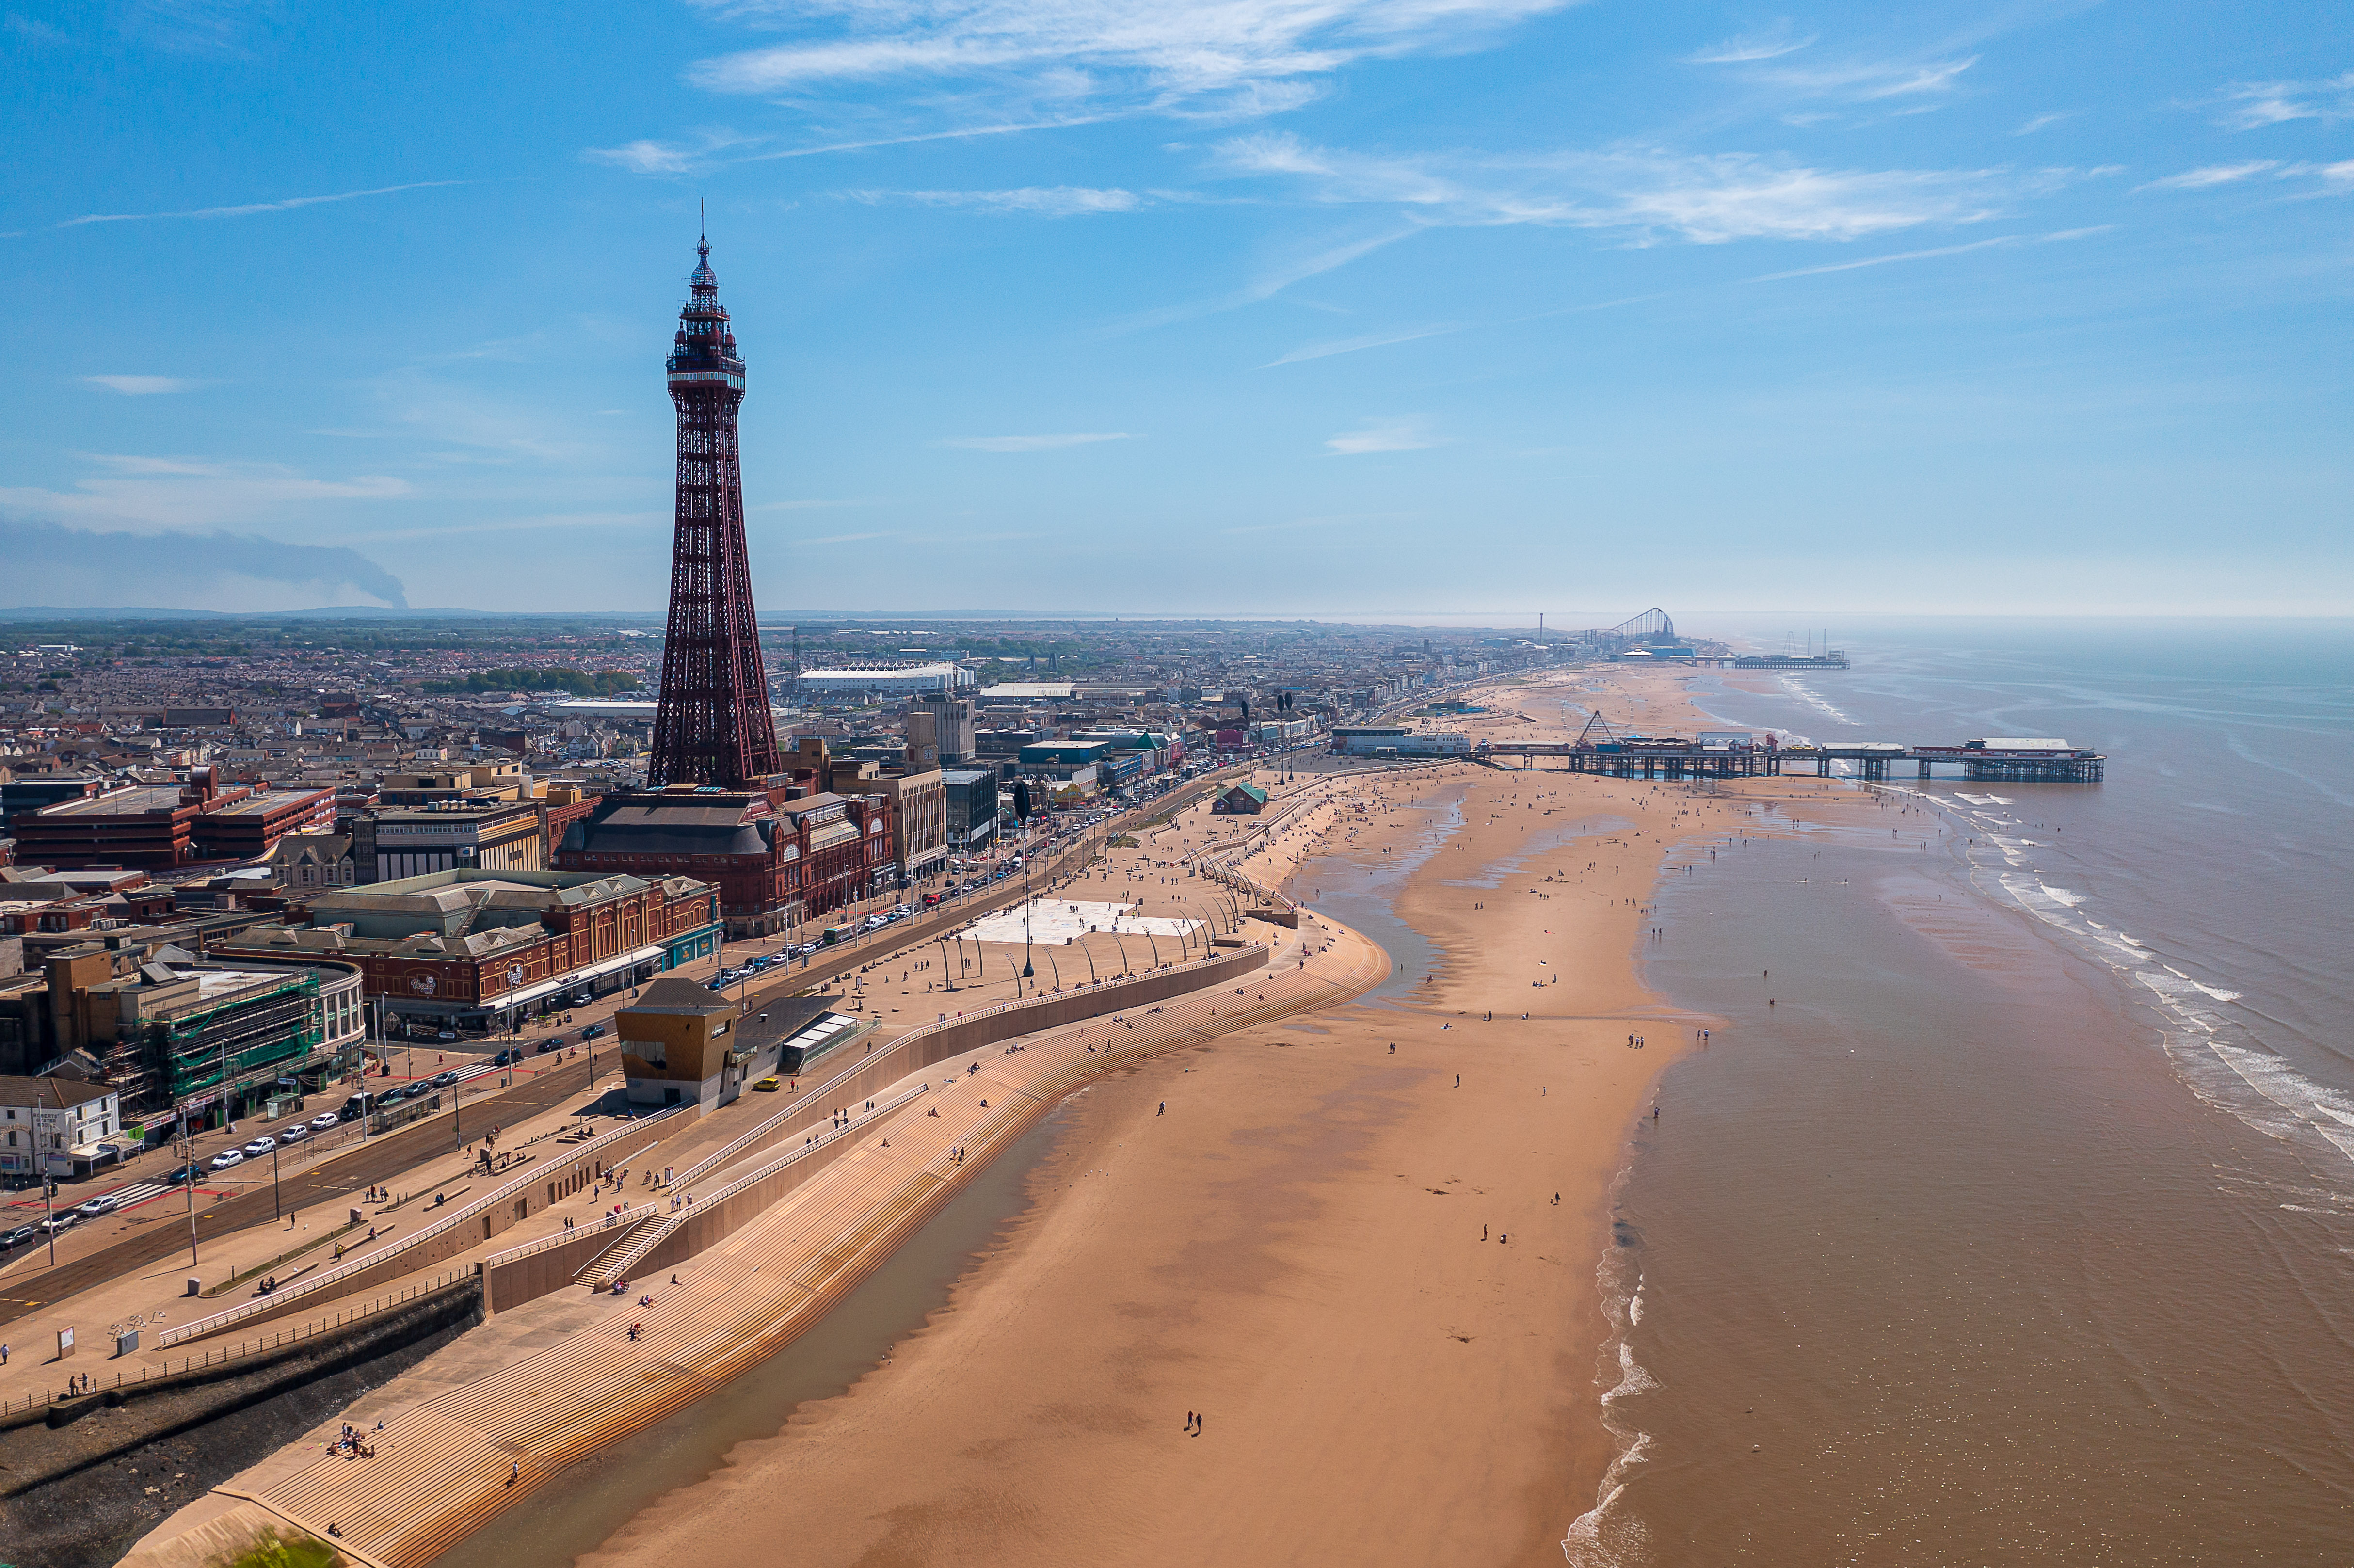 The Blackpool Tower and beach